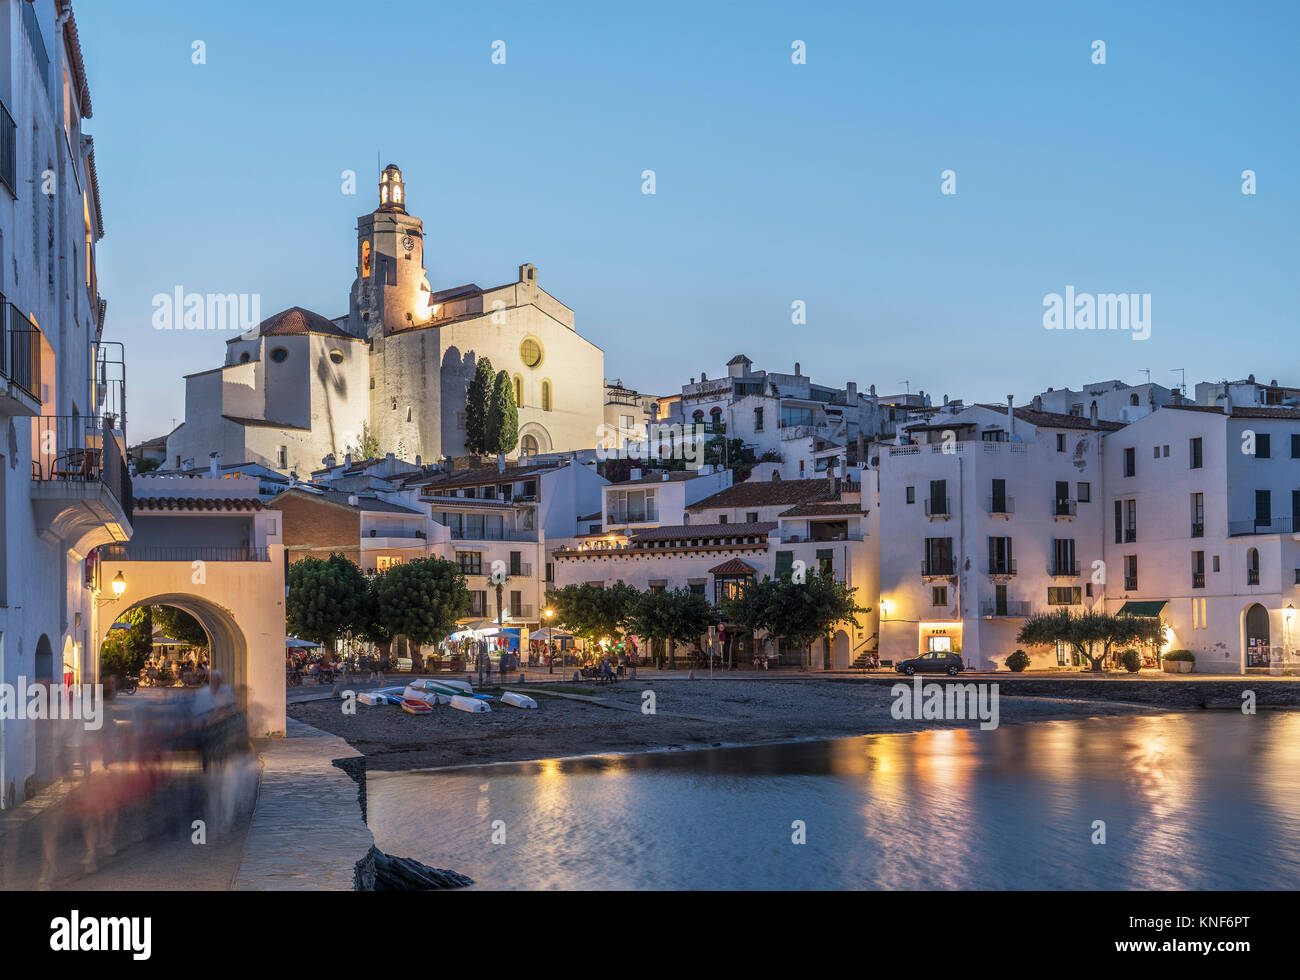 Village of Cadaques at dusk, on the Costa Brava, Spain Stock Photo